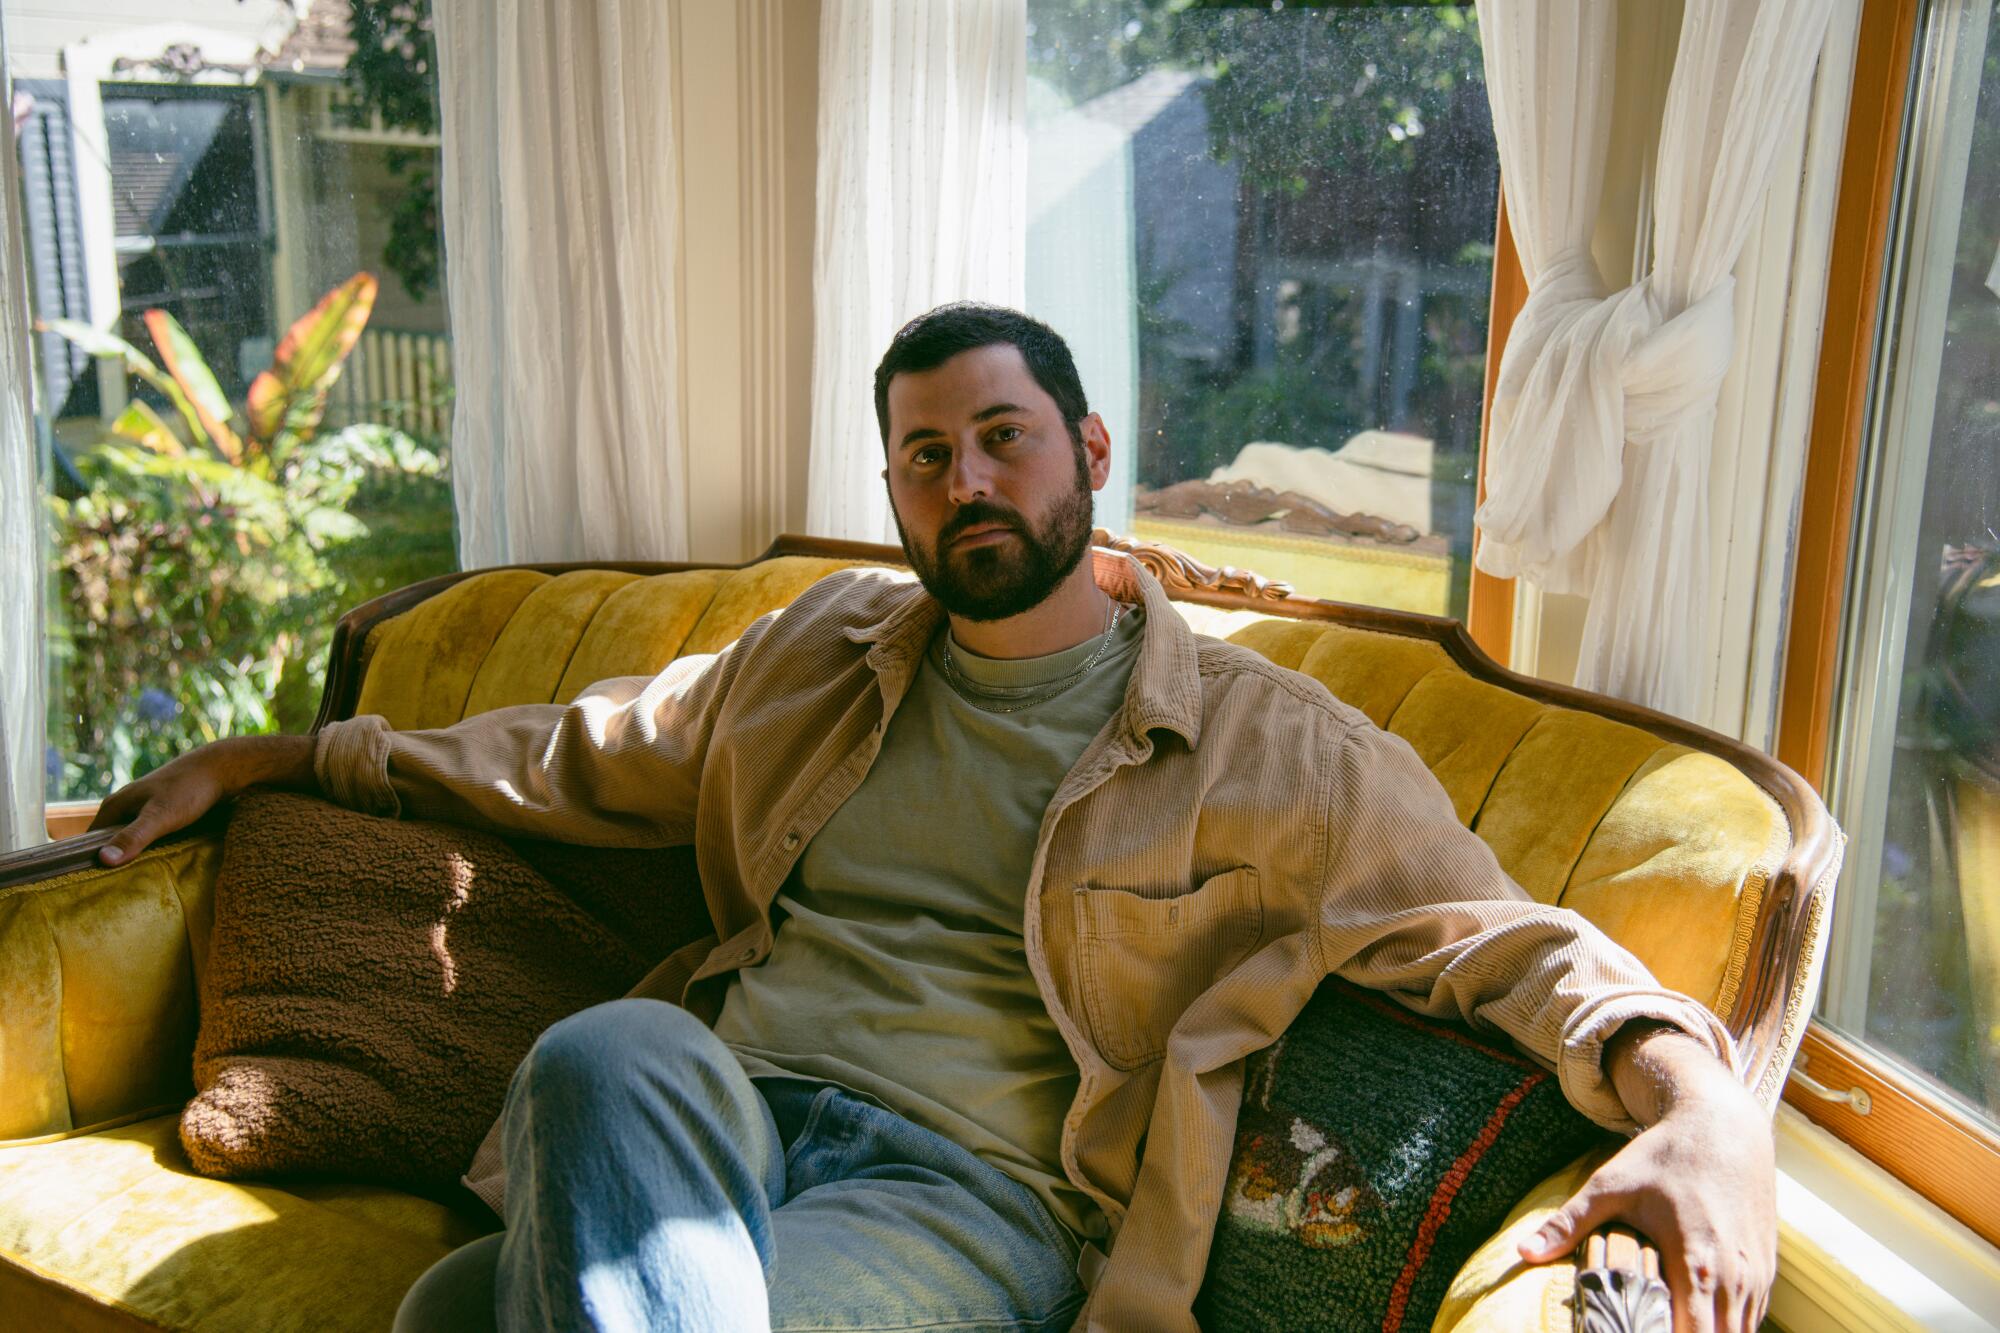 A bearded man in a grey tee shirt, tan jacket and blue jeans sitting on a yellow loveseat with legs crossed.